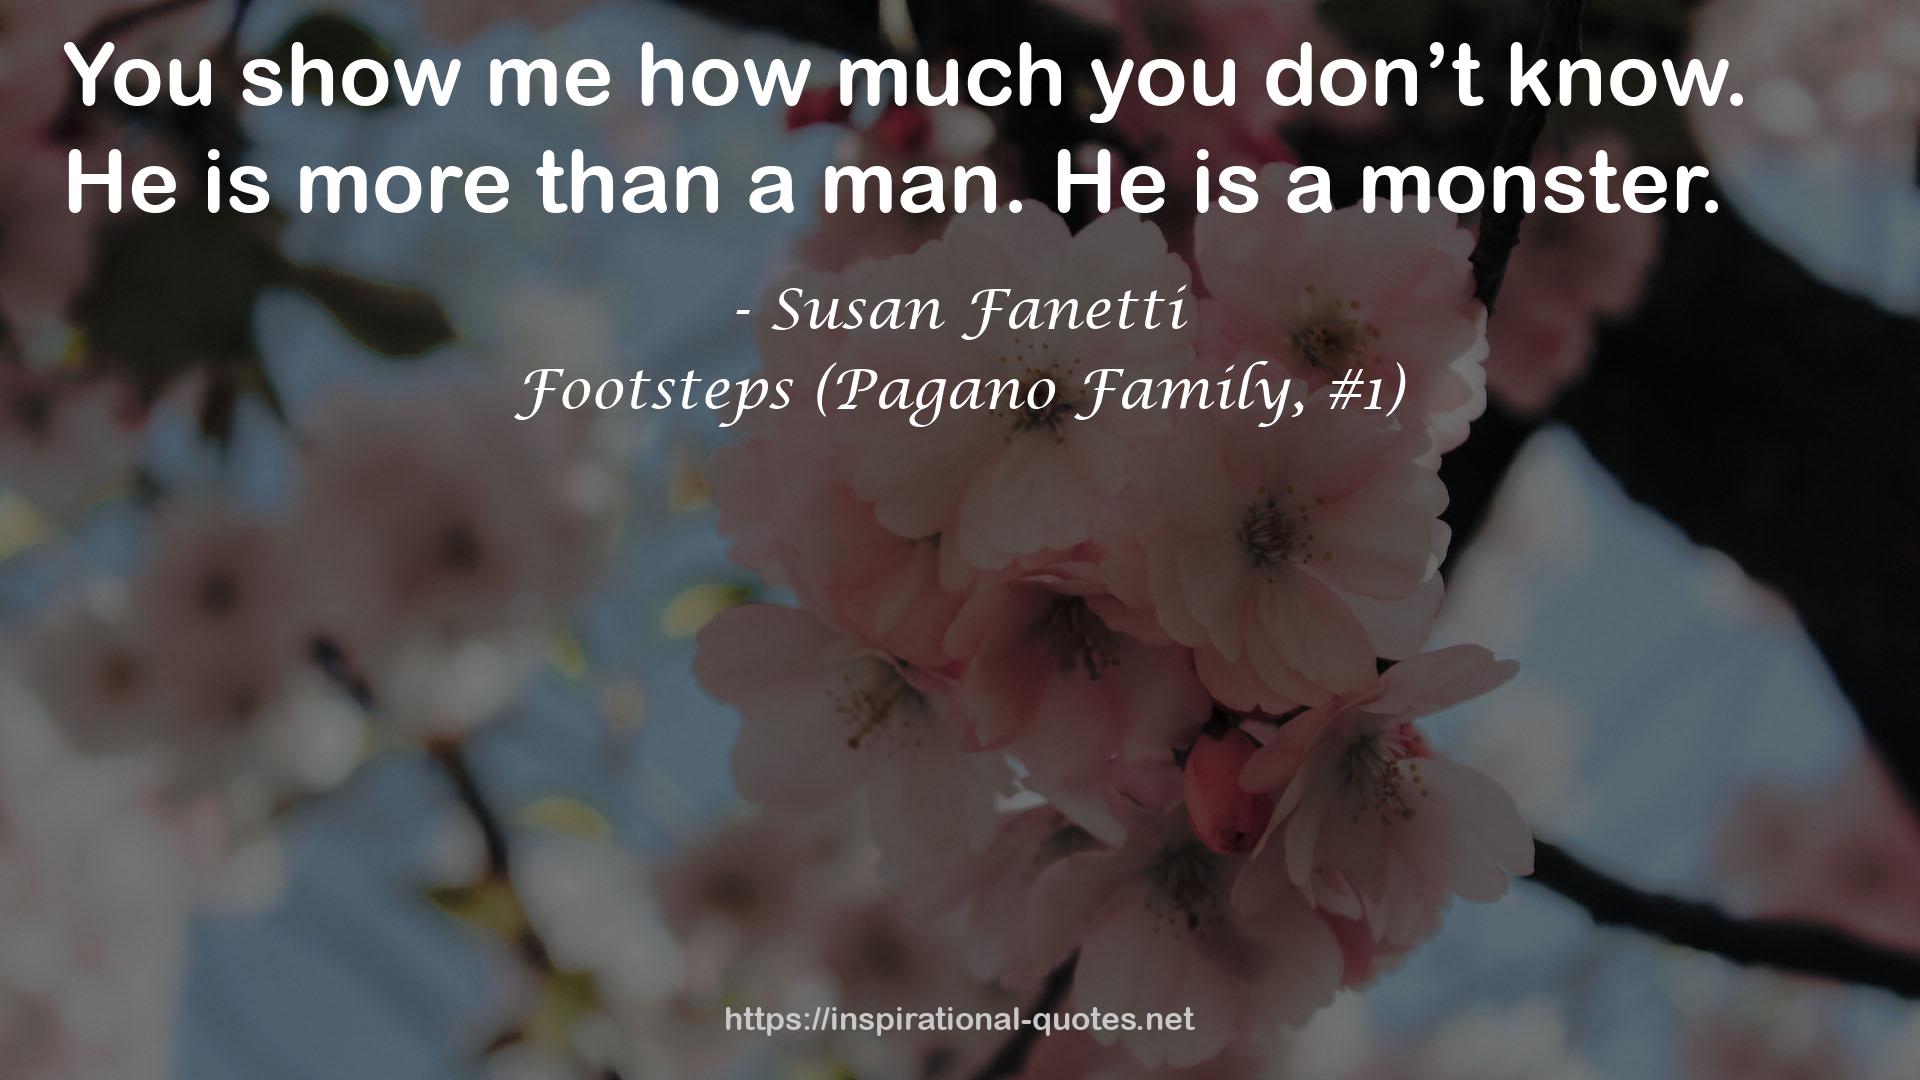 Footsteps (Pagano Family, #1) QUOTES